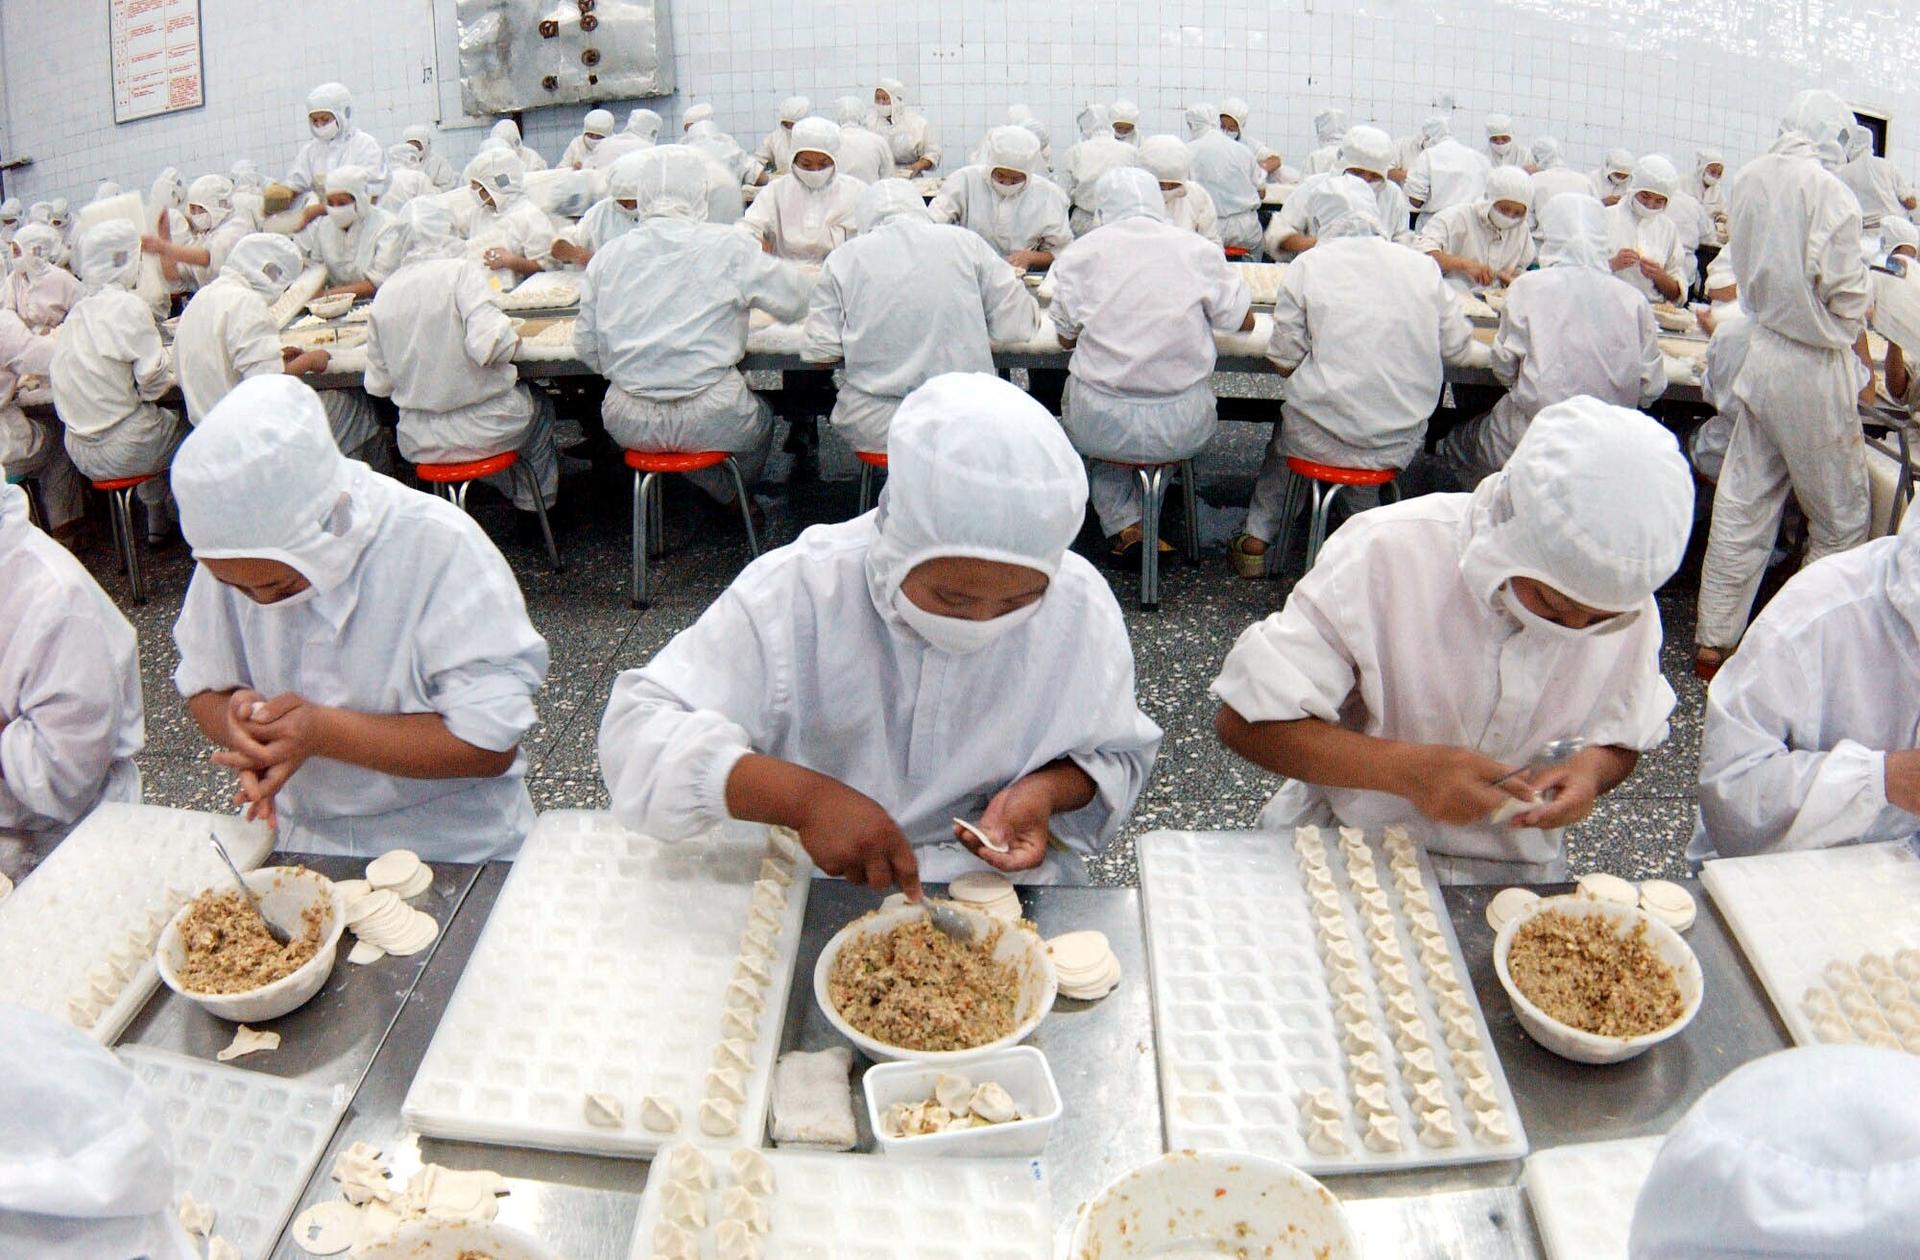 Zhengzhou's Sanquan Foods pump out hundreds of tons of frozen food each day for consumers.